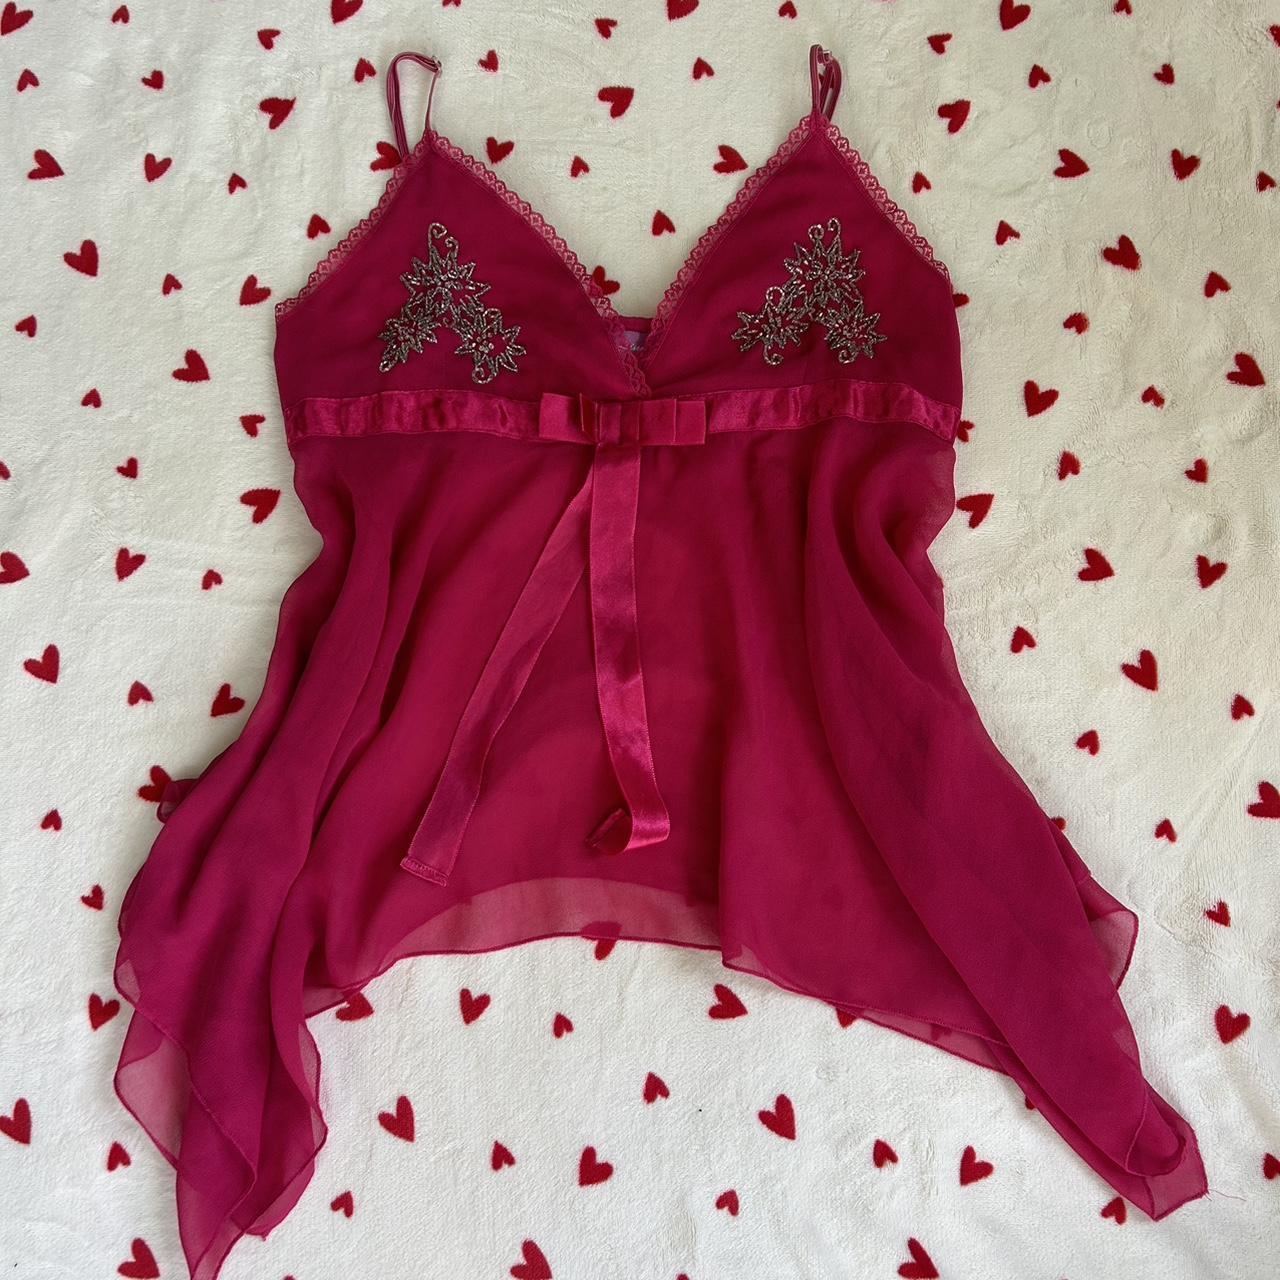 💕🎀 amazing hot pink lingerie cami with beaded... - Depop